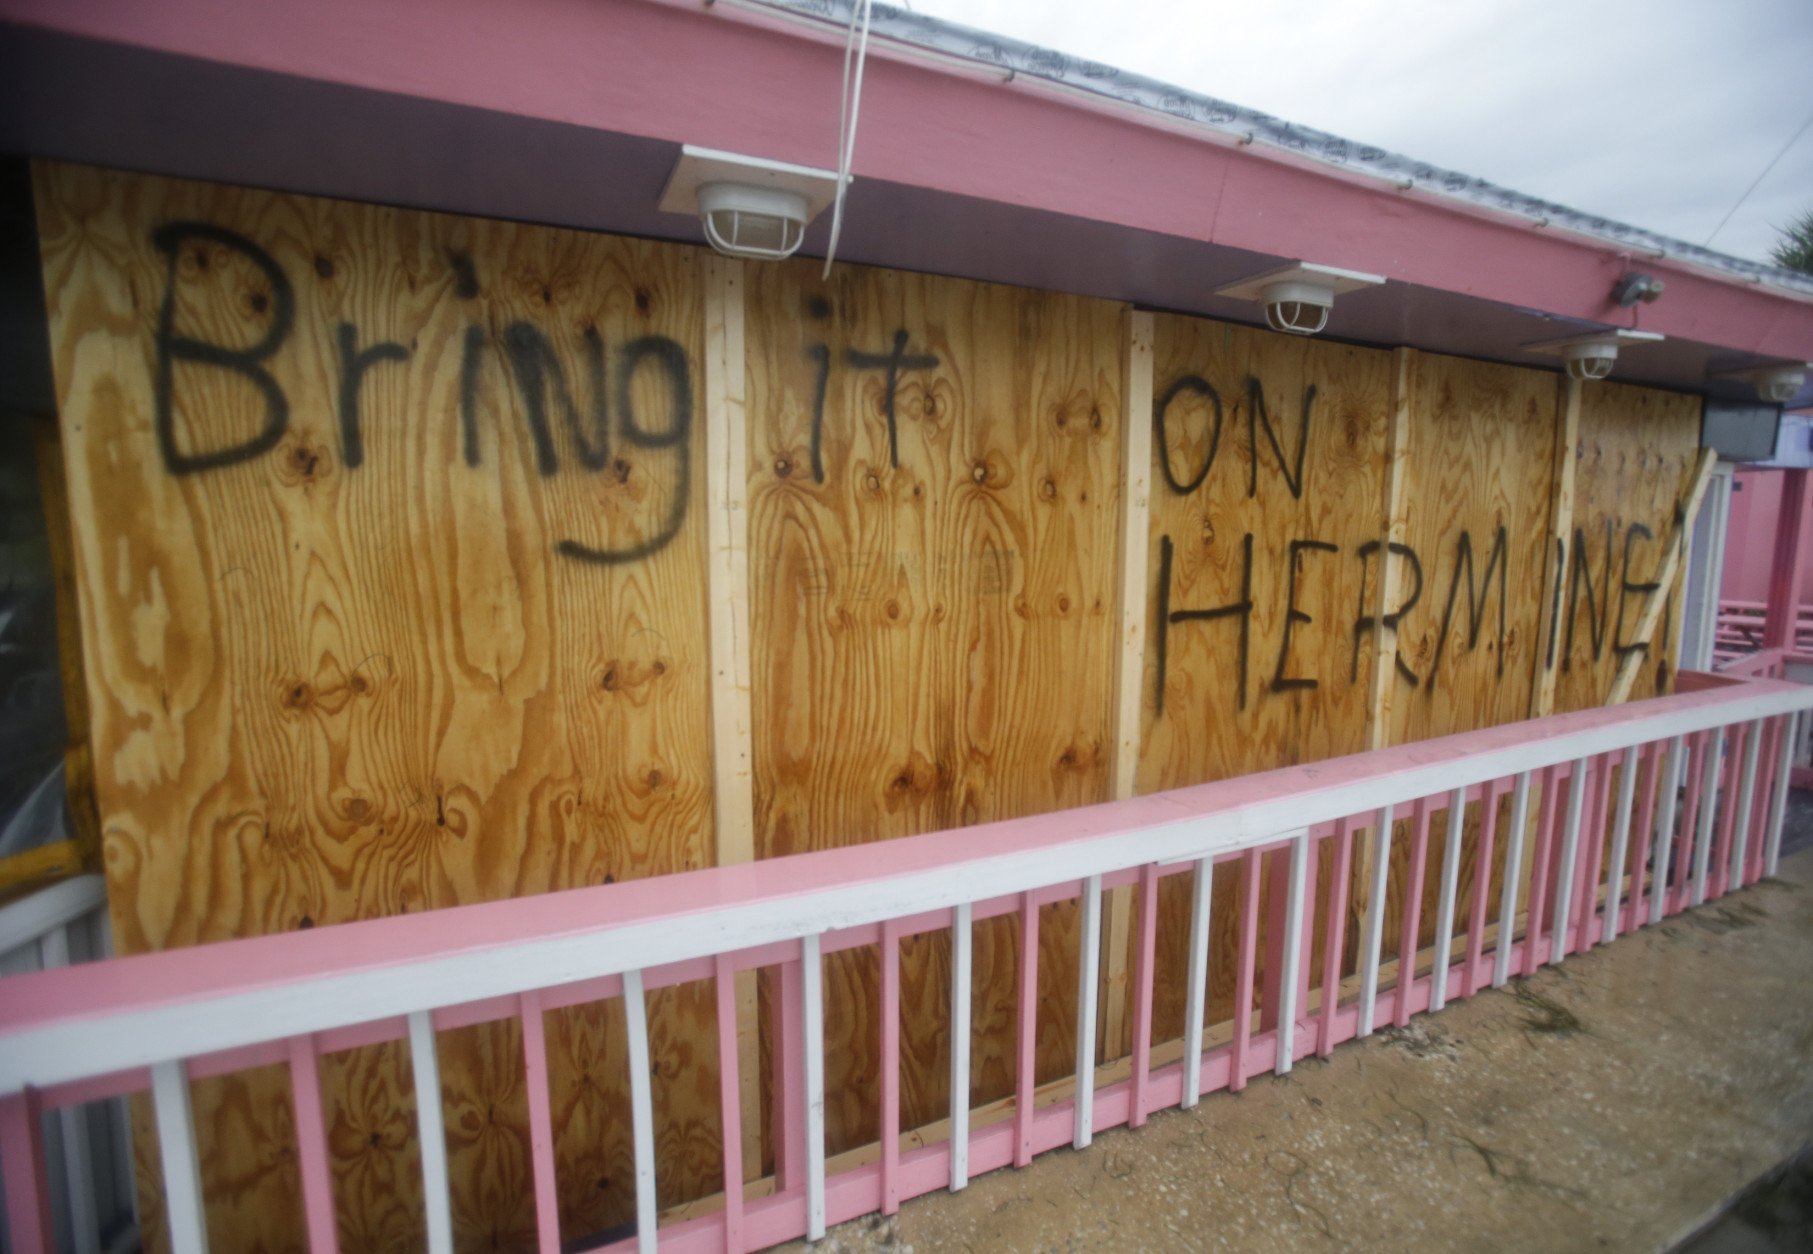 A hand painted sign on a boarded up bar is seen as Hurricane Hermine nears the Florida coast, Thursday, Sept. 1, 2016, in Cedar Key, Fla. ﻿Hurricane Hermine gained new strength Thursday evening and roared ever closer to Florida's Gulf Coast, where rough surf began smashing against docks and boathouses and people braced for the first direct hit on the state from a hurricane in over a decade. ﻿(AP Photo/John Raoux)